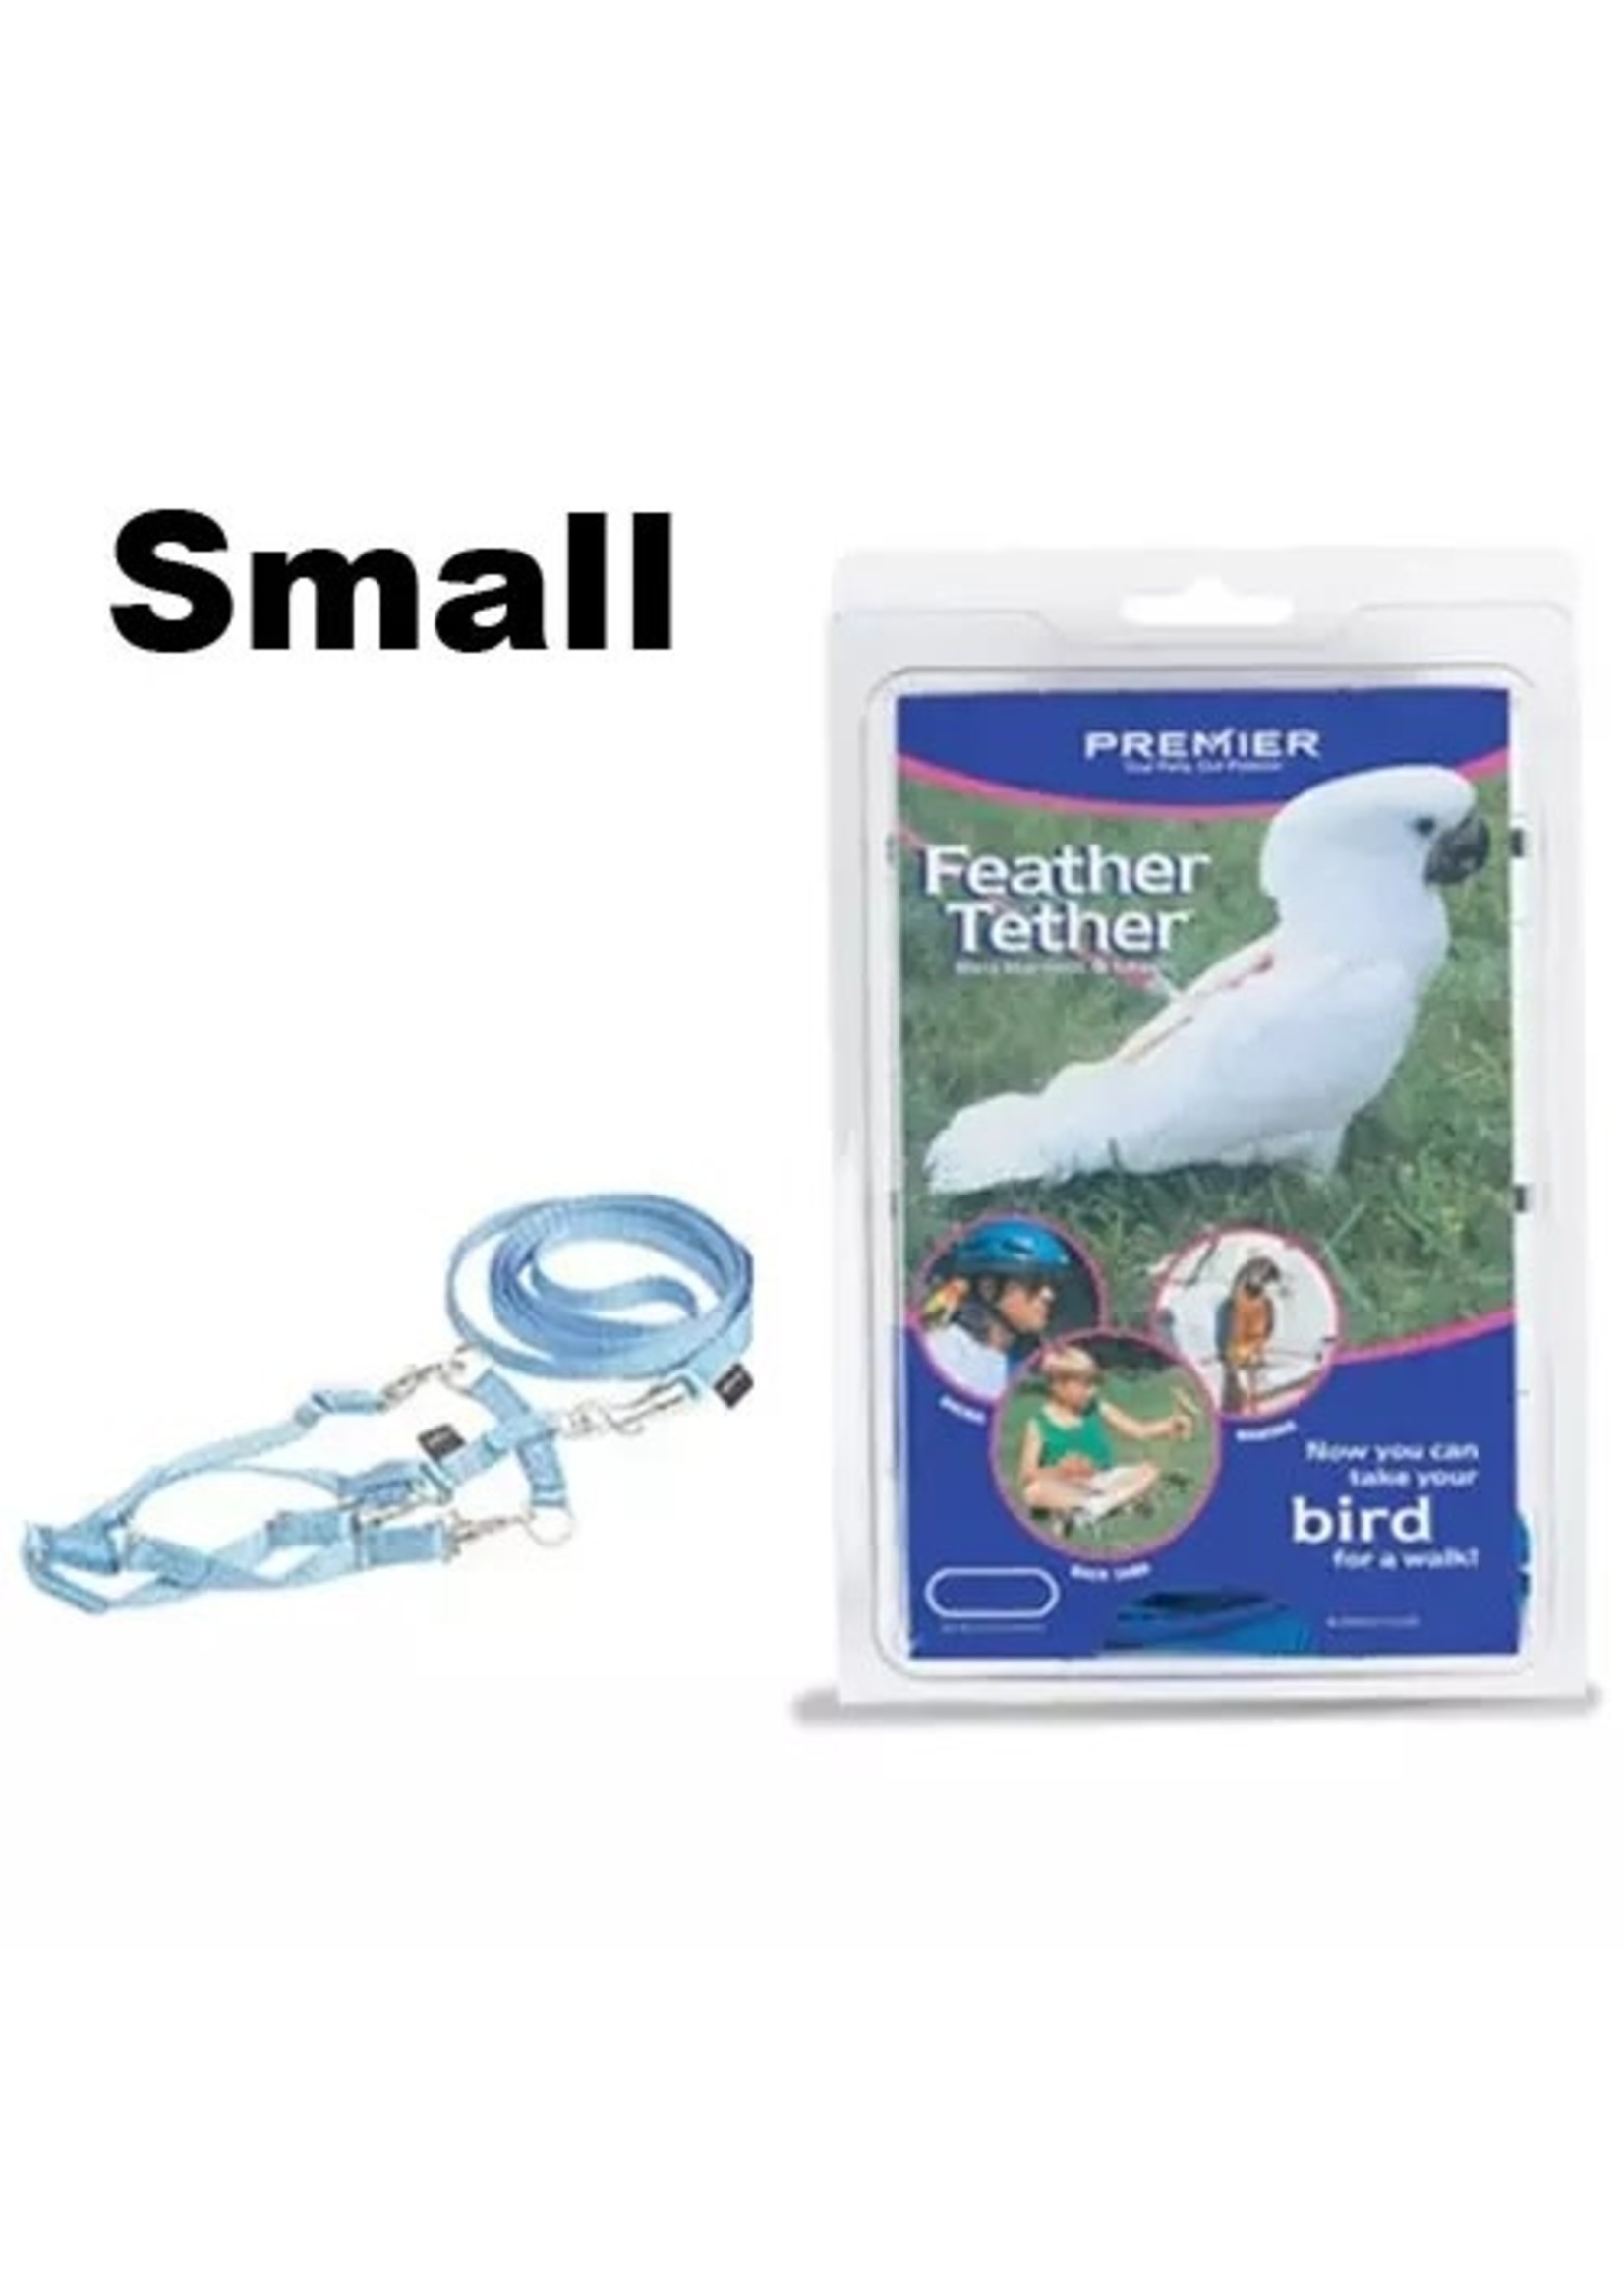 Premier Feather Tether Bird Harness and Leash Small Royal Blue